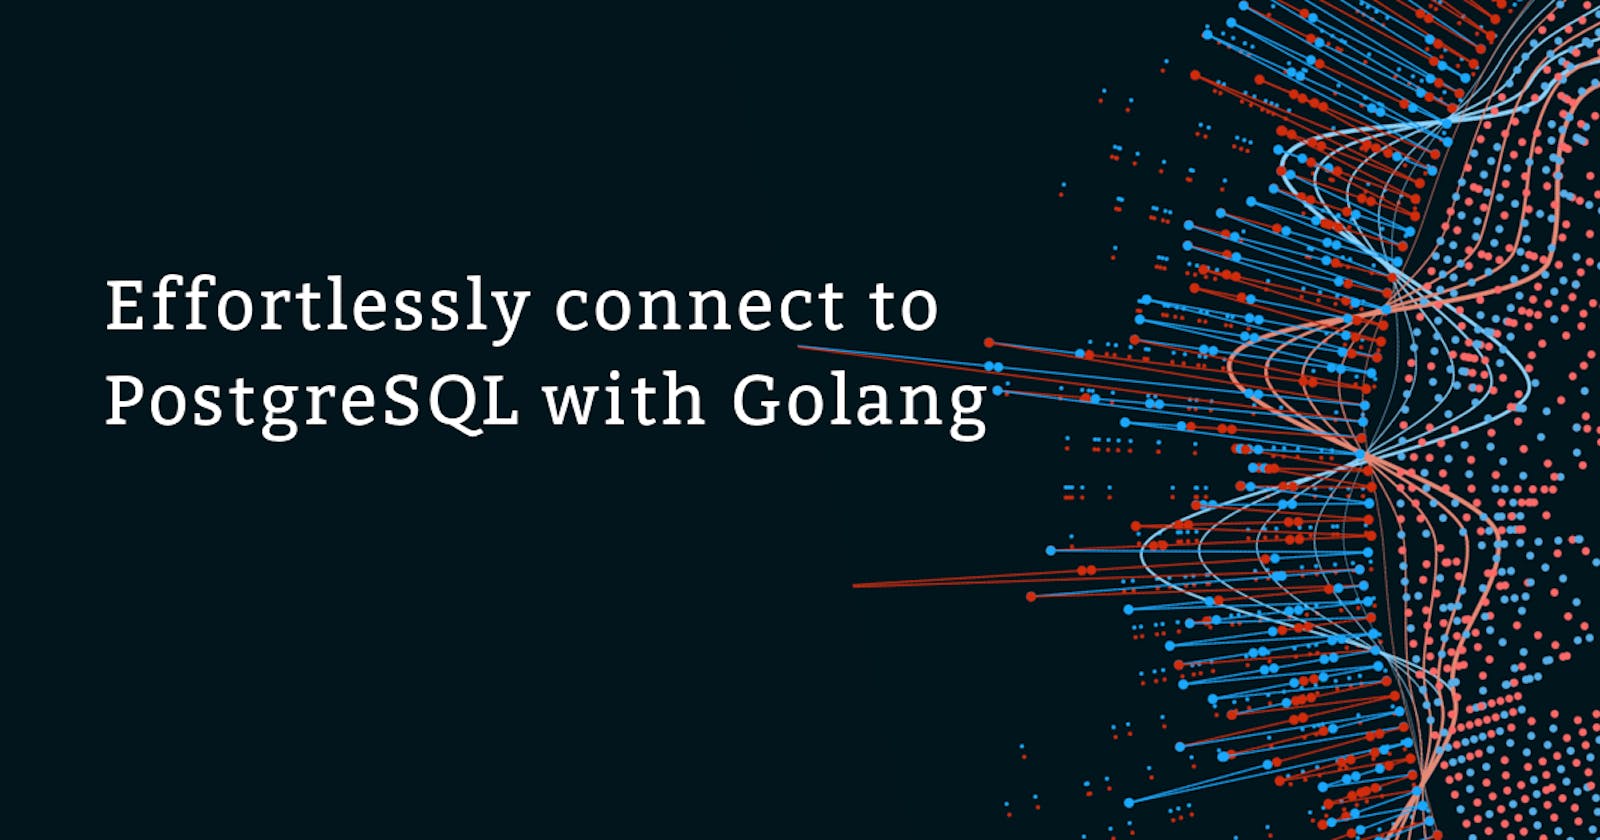 How to Effortlessly connect to PostgreSQL with Golang